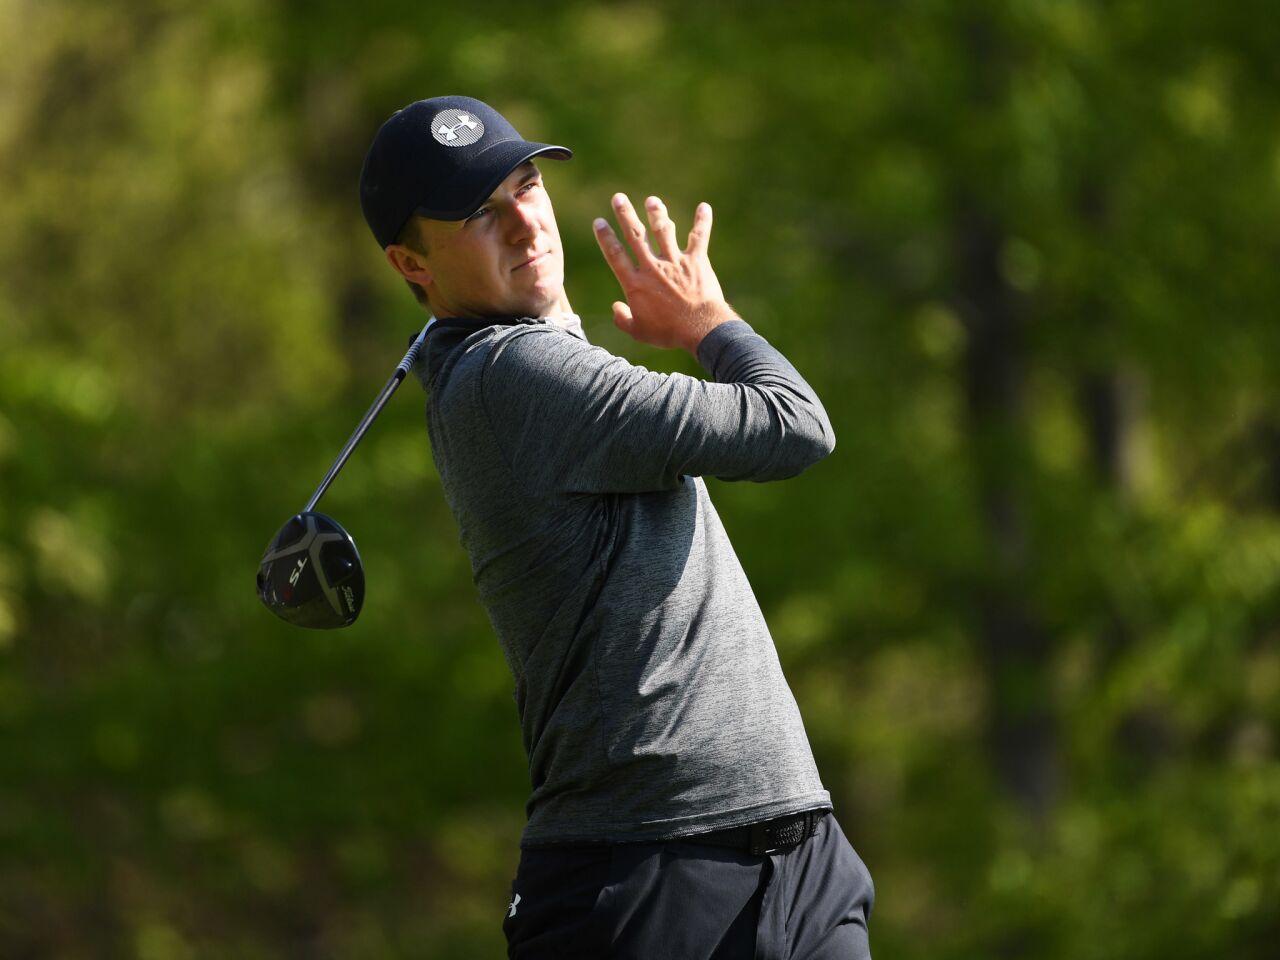 Jordan Spieth plays his shot from the 16th tee during the second round of the 2019 PGA Championship at the Bethpage Black course in Farmingdale, New York.